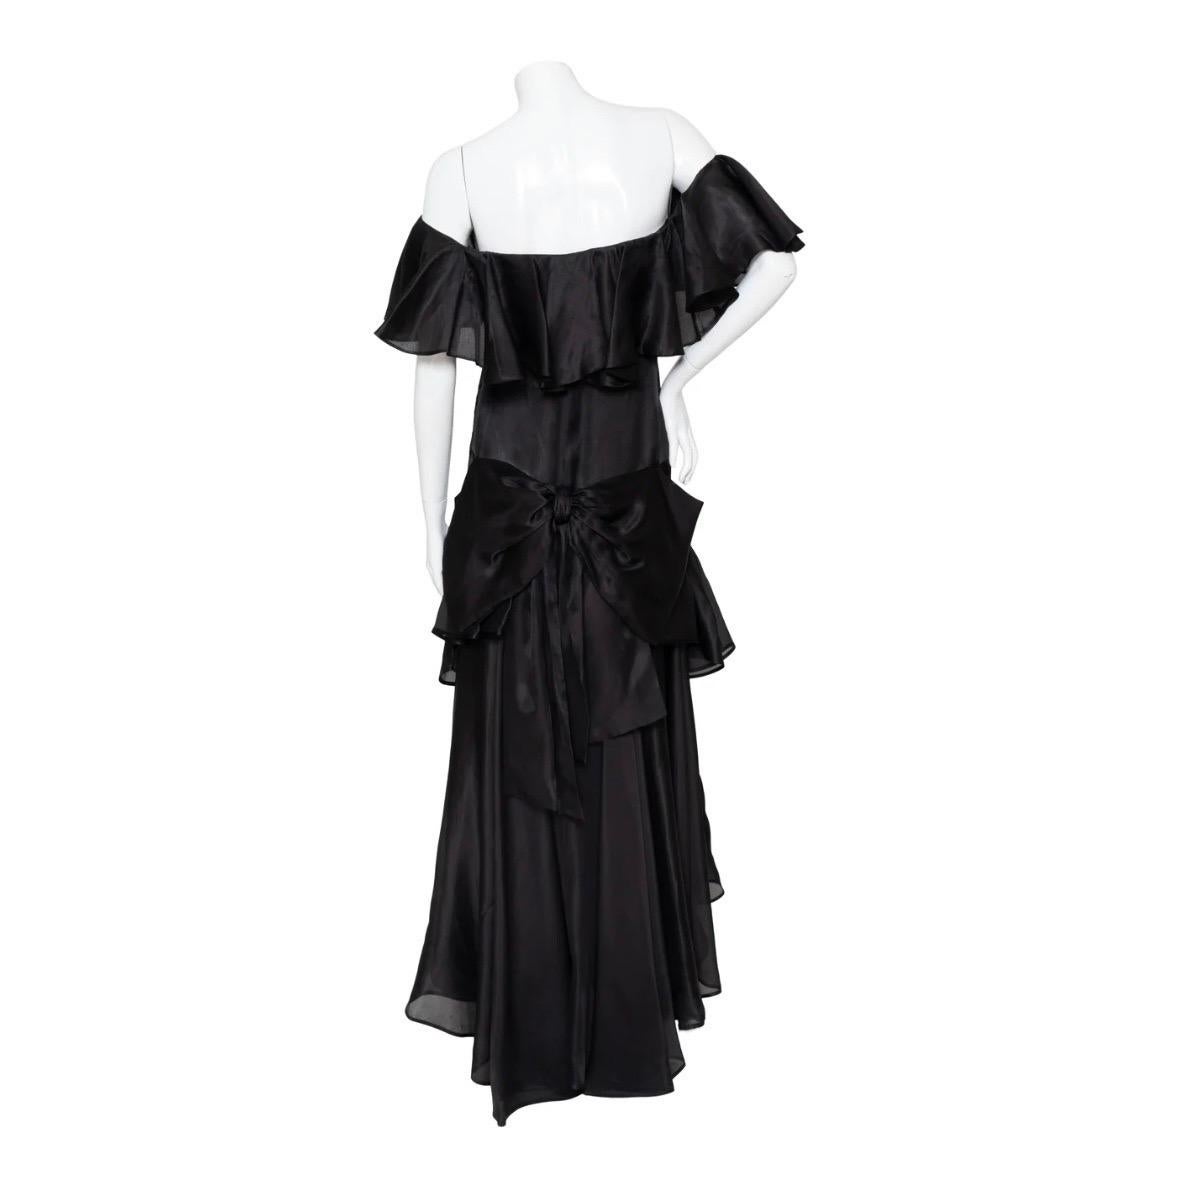 Haute Couture Ruffled Gown by Yves Saint Laurent 
Circa 1980s
Off shoulder with ruffle overlay
Drop waist with ruffle detail
Oversized bow on back
Semisheer 
High low a-line silhouette
Front seams
Size zipper closure
Serial Number: 52788 on